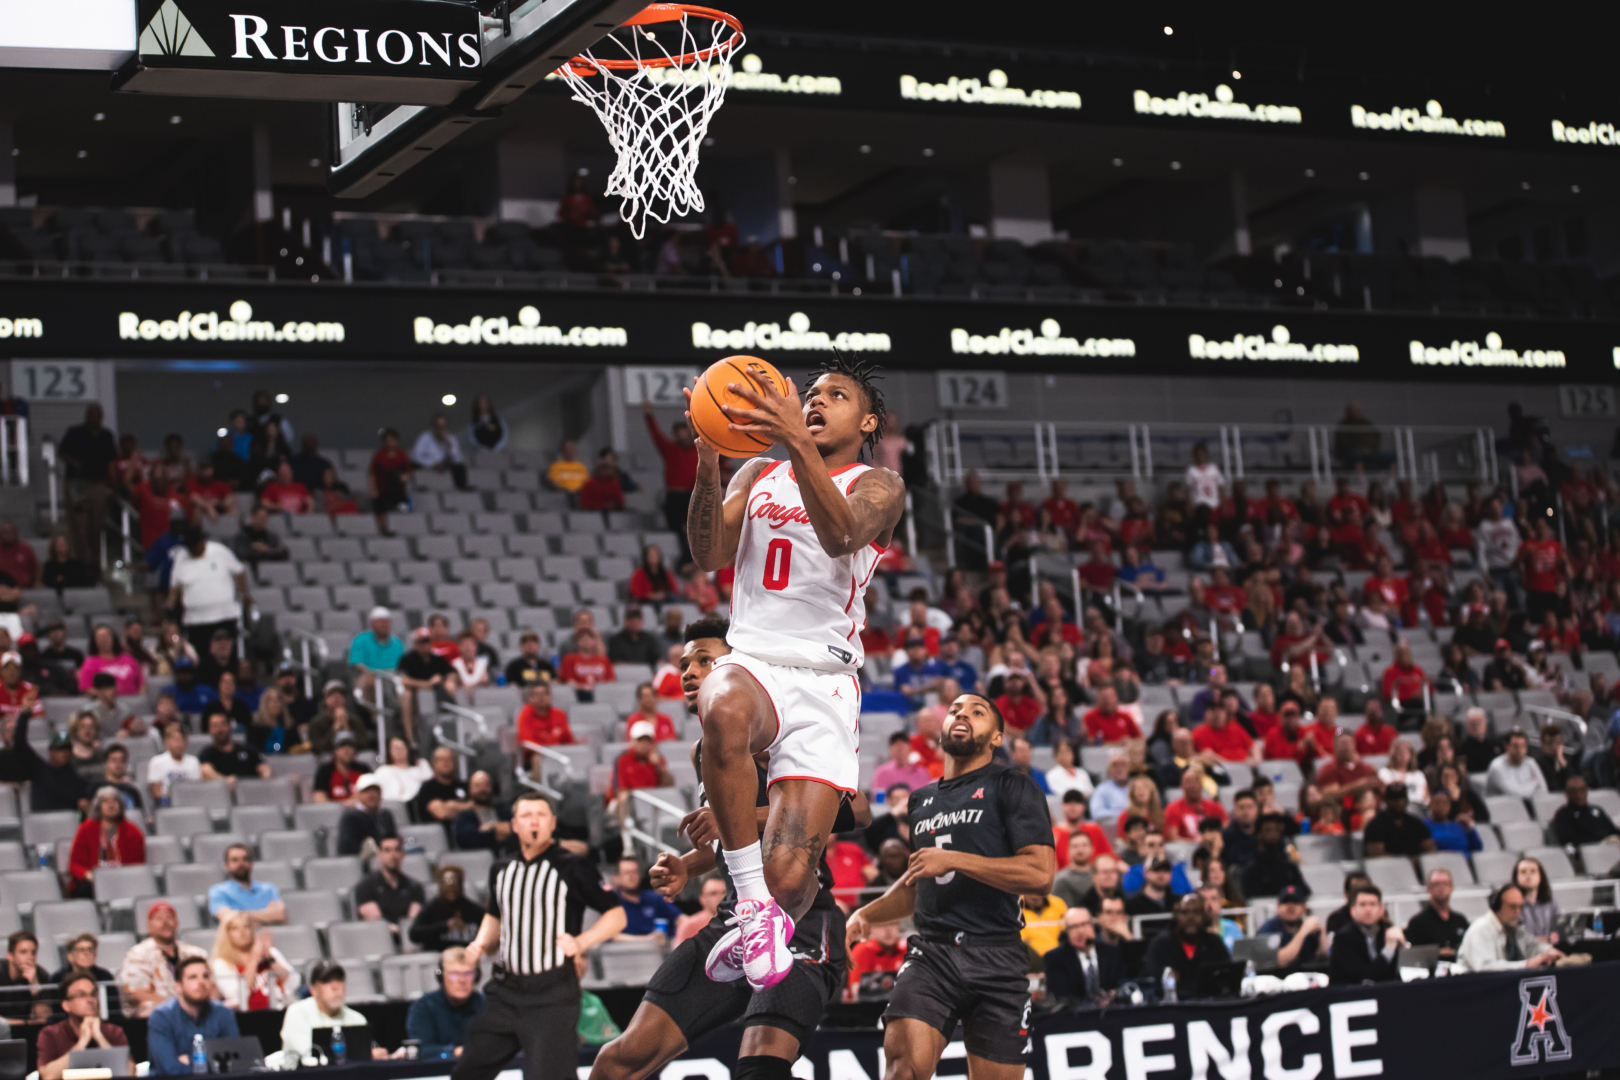 Marcus Sasser, who leads UH in scoring averaging 17.1 points per game, is recovering from a strained groin the senior guard suffered during the AAC Tournament. | Sean Thomas/The Cougar